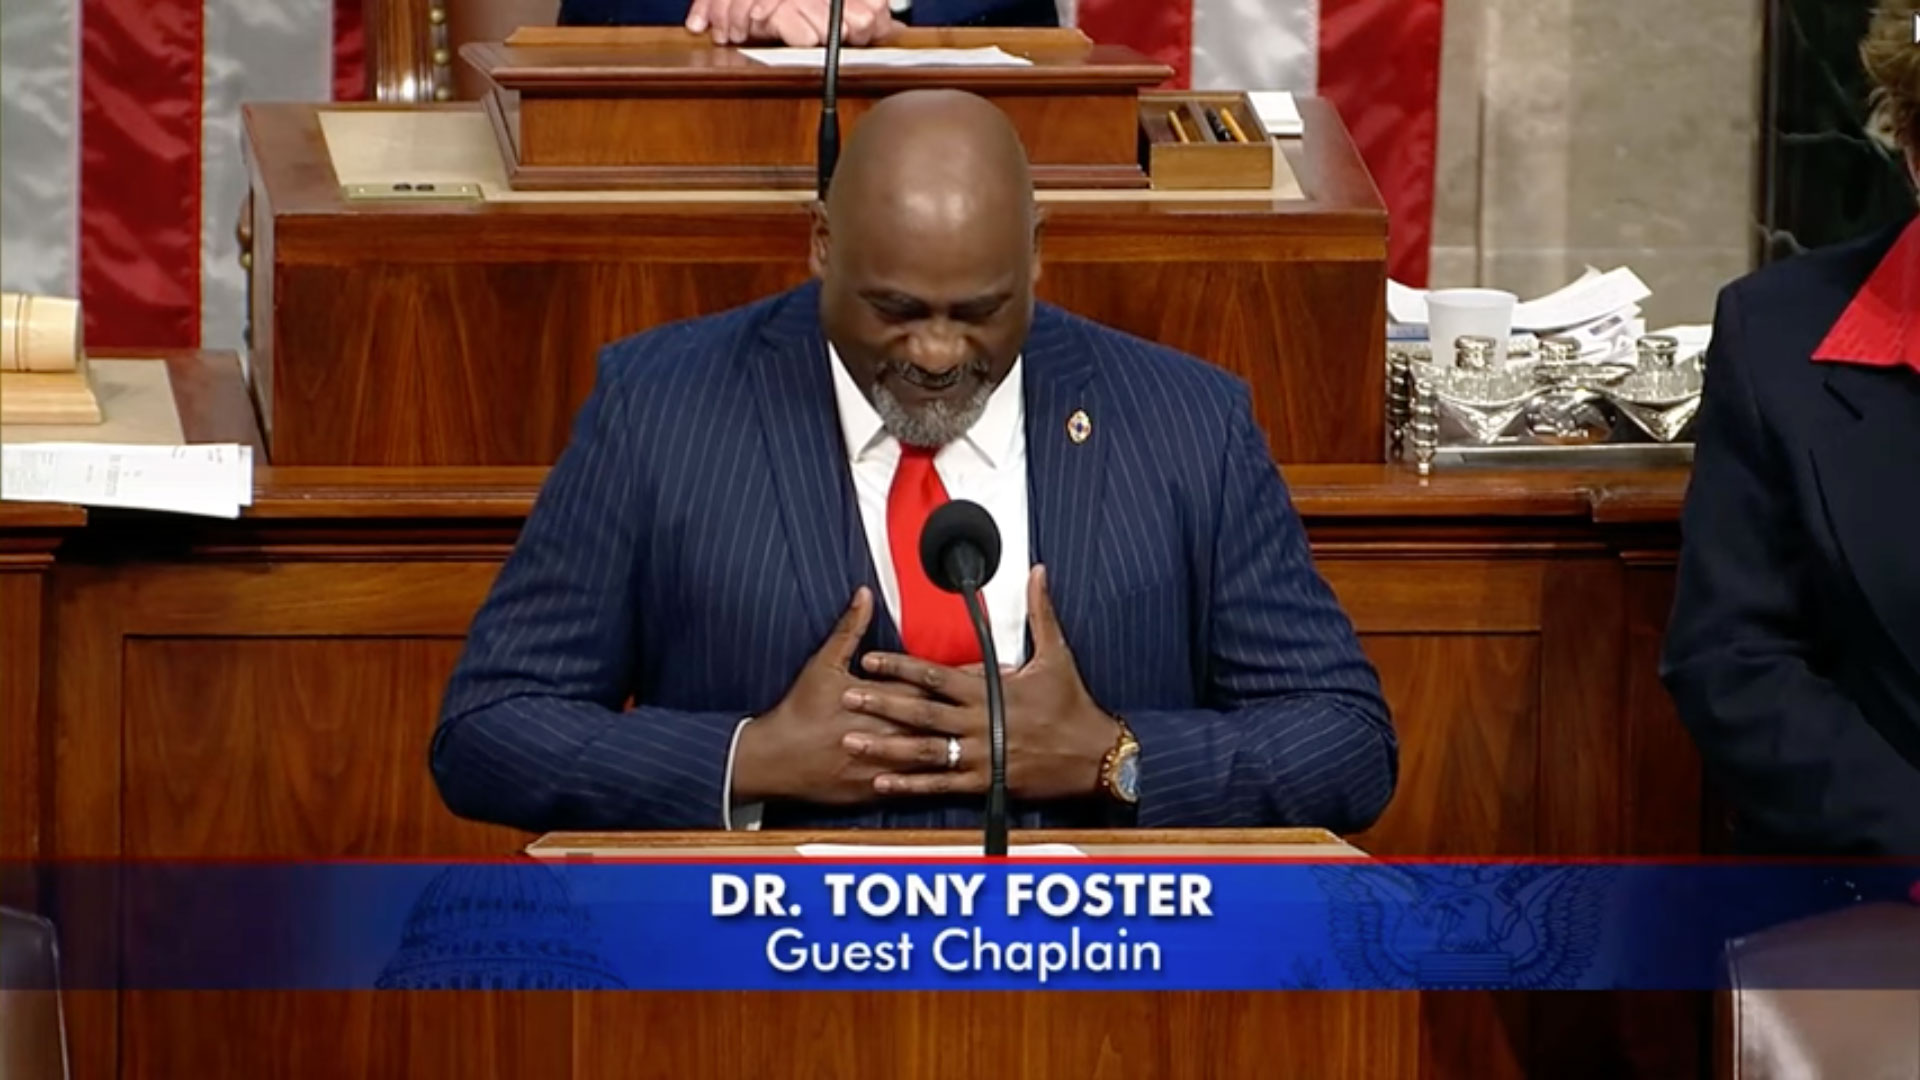 CLSTG Grad, Dr. Tony Foster, Serves as Guest Chaplain for US House